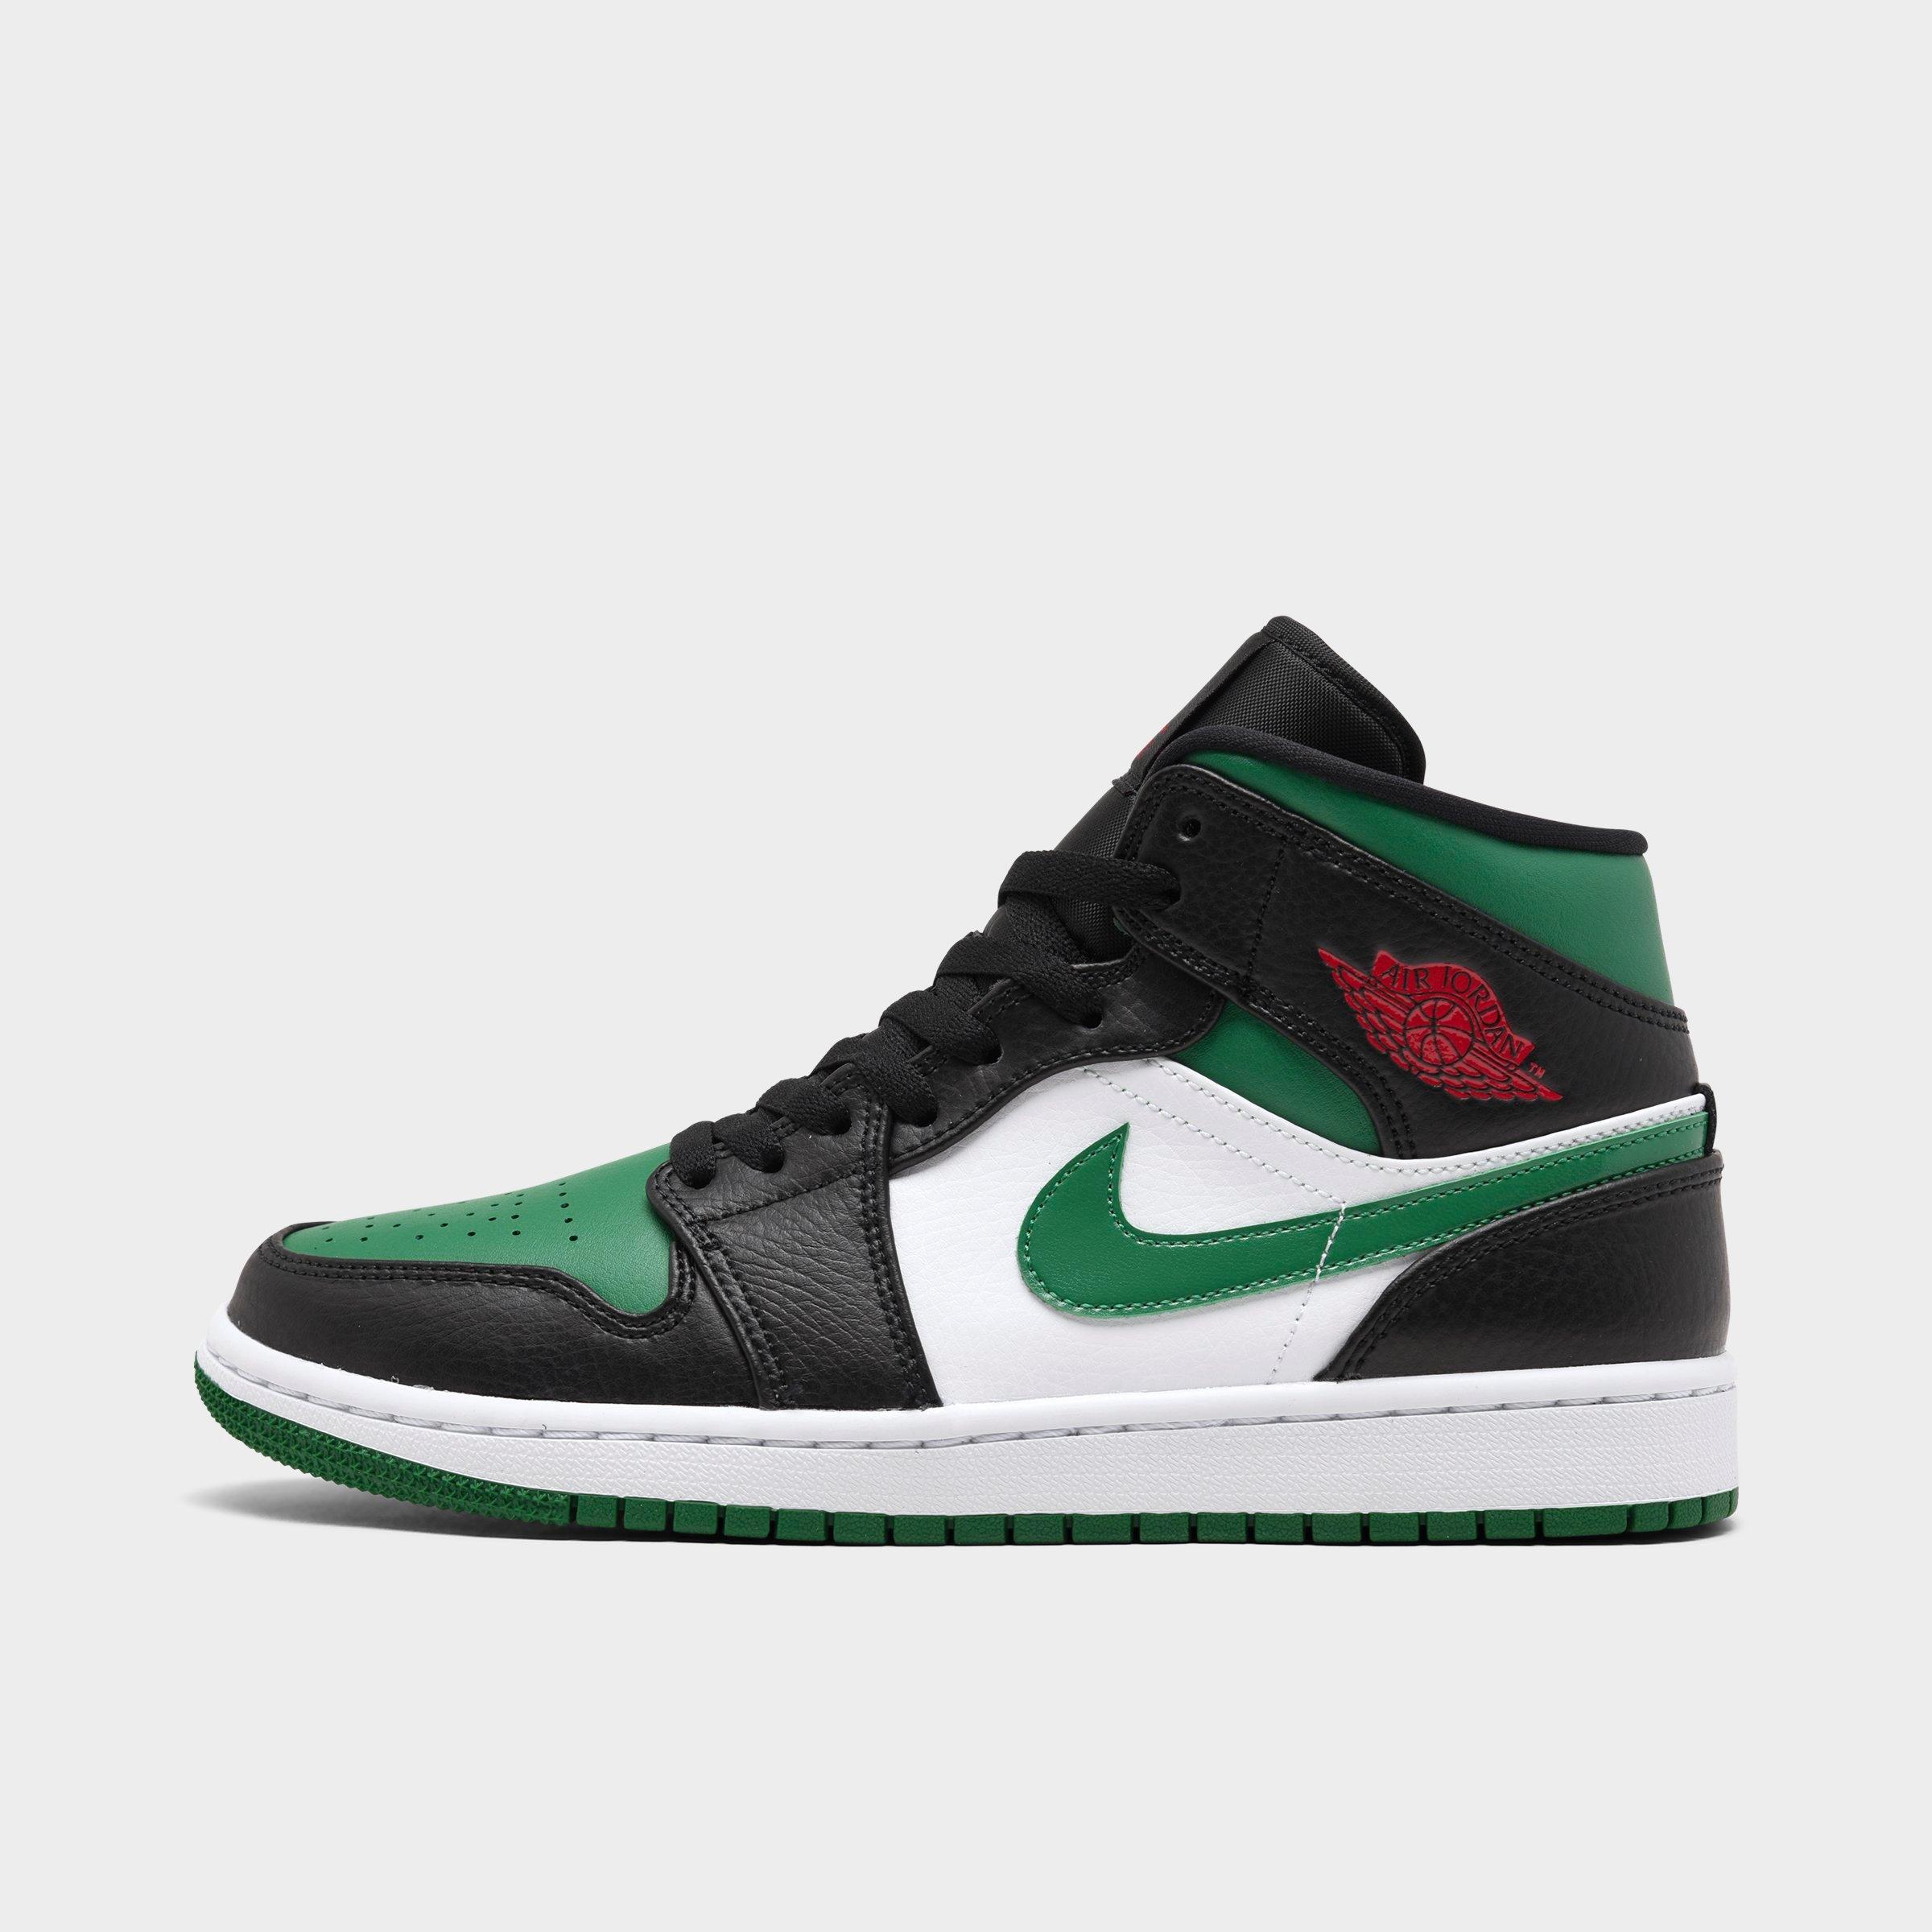 red and green retro 1